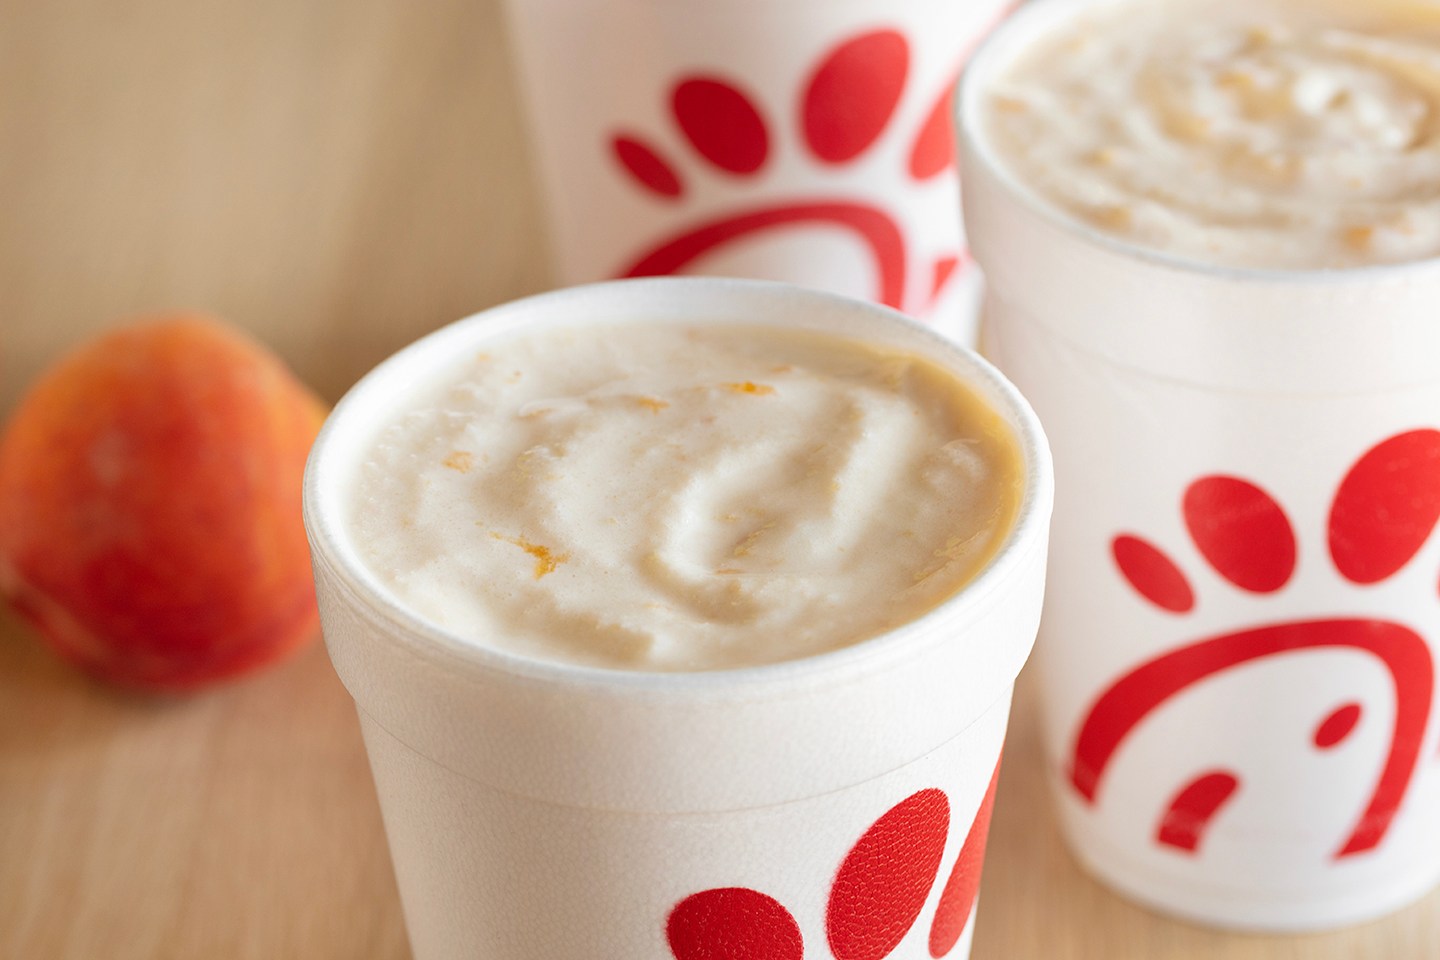 When and where will the Peach Milkshake be available? ChickfilA